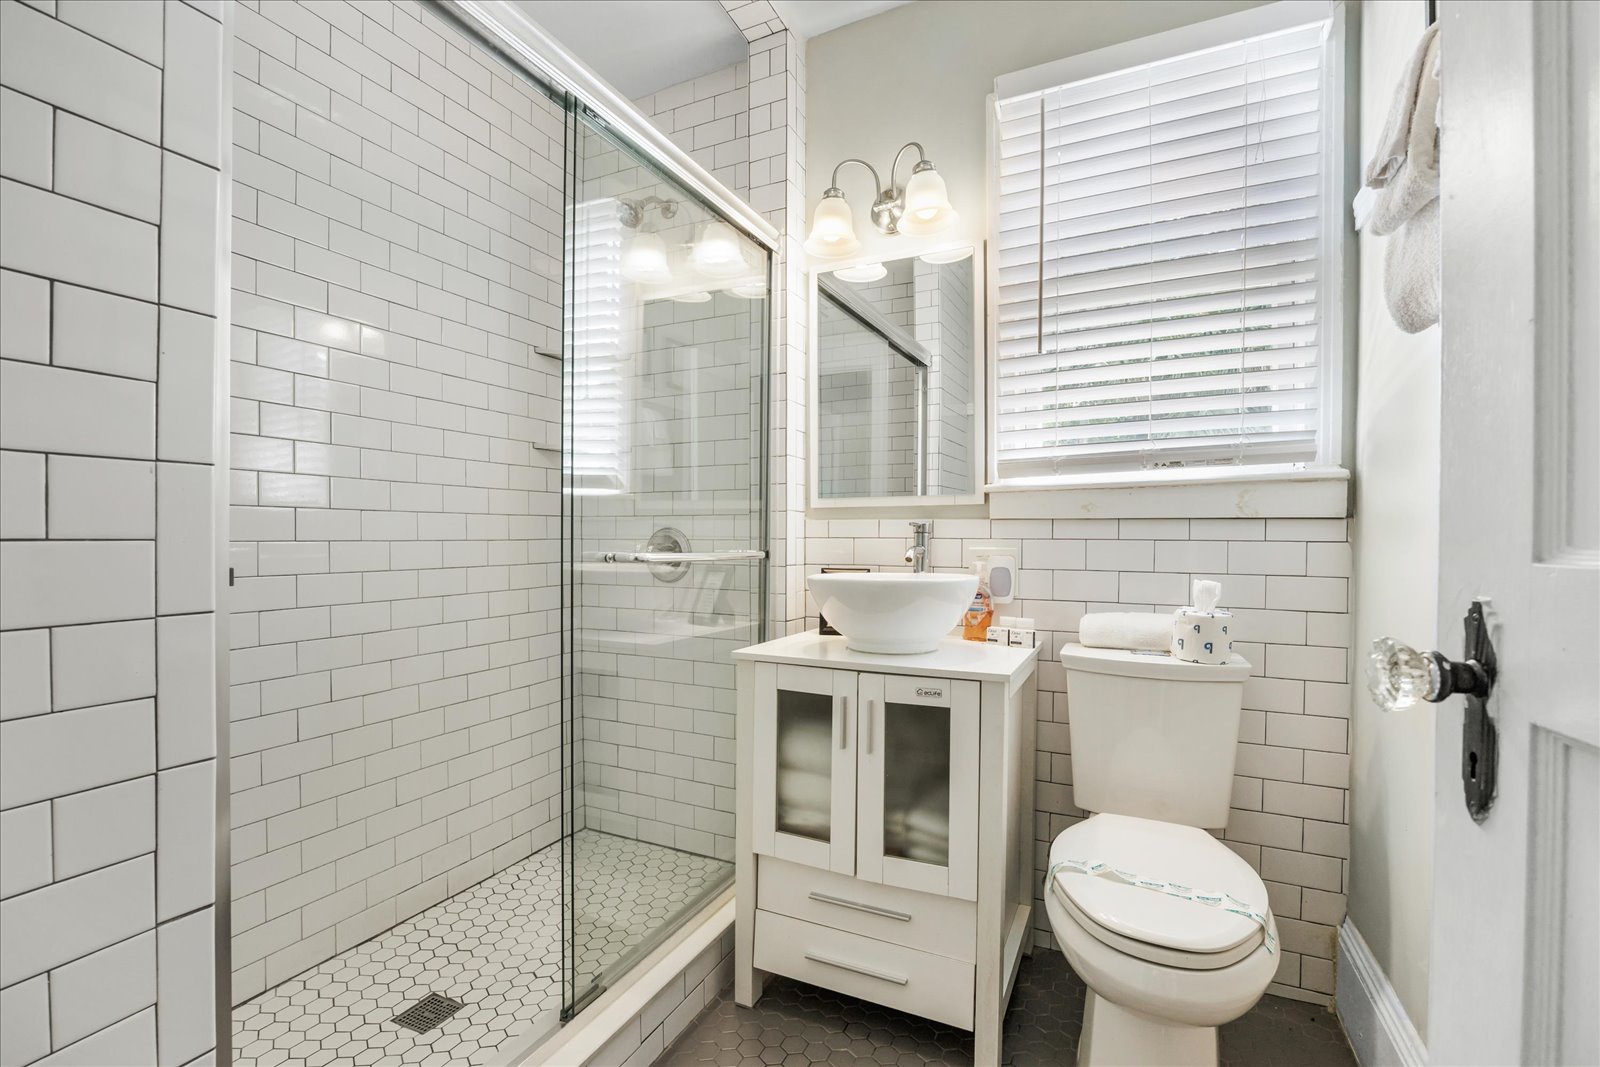 Unit B – The full bathroom offers a chic single vanity & glass shower